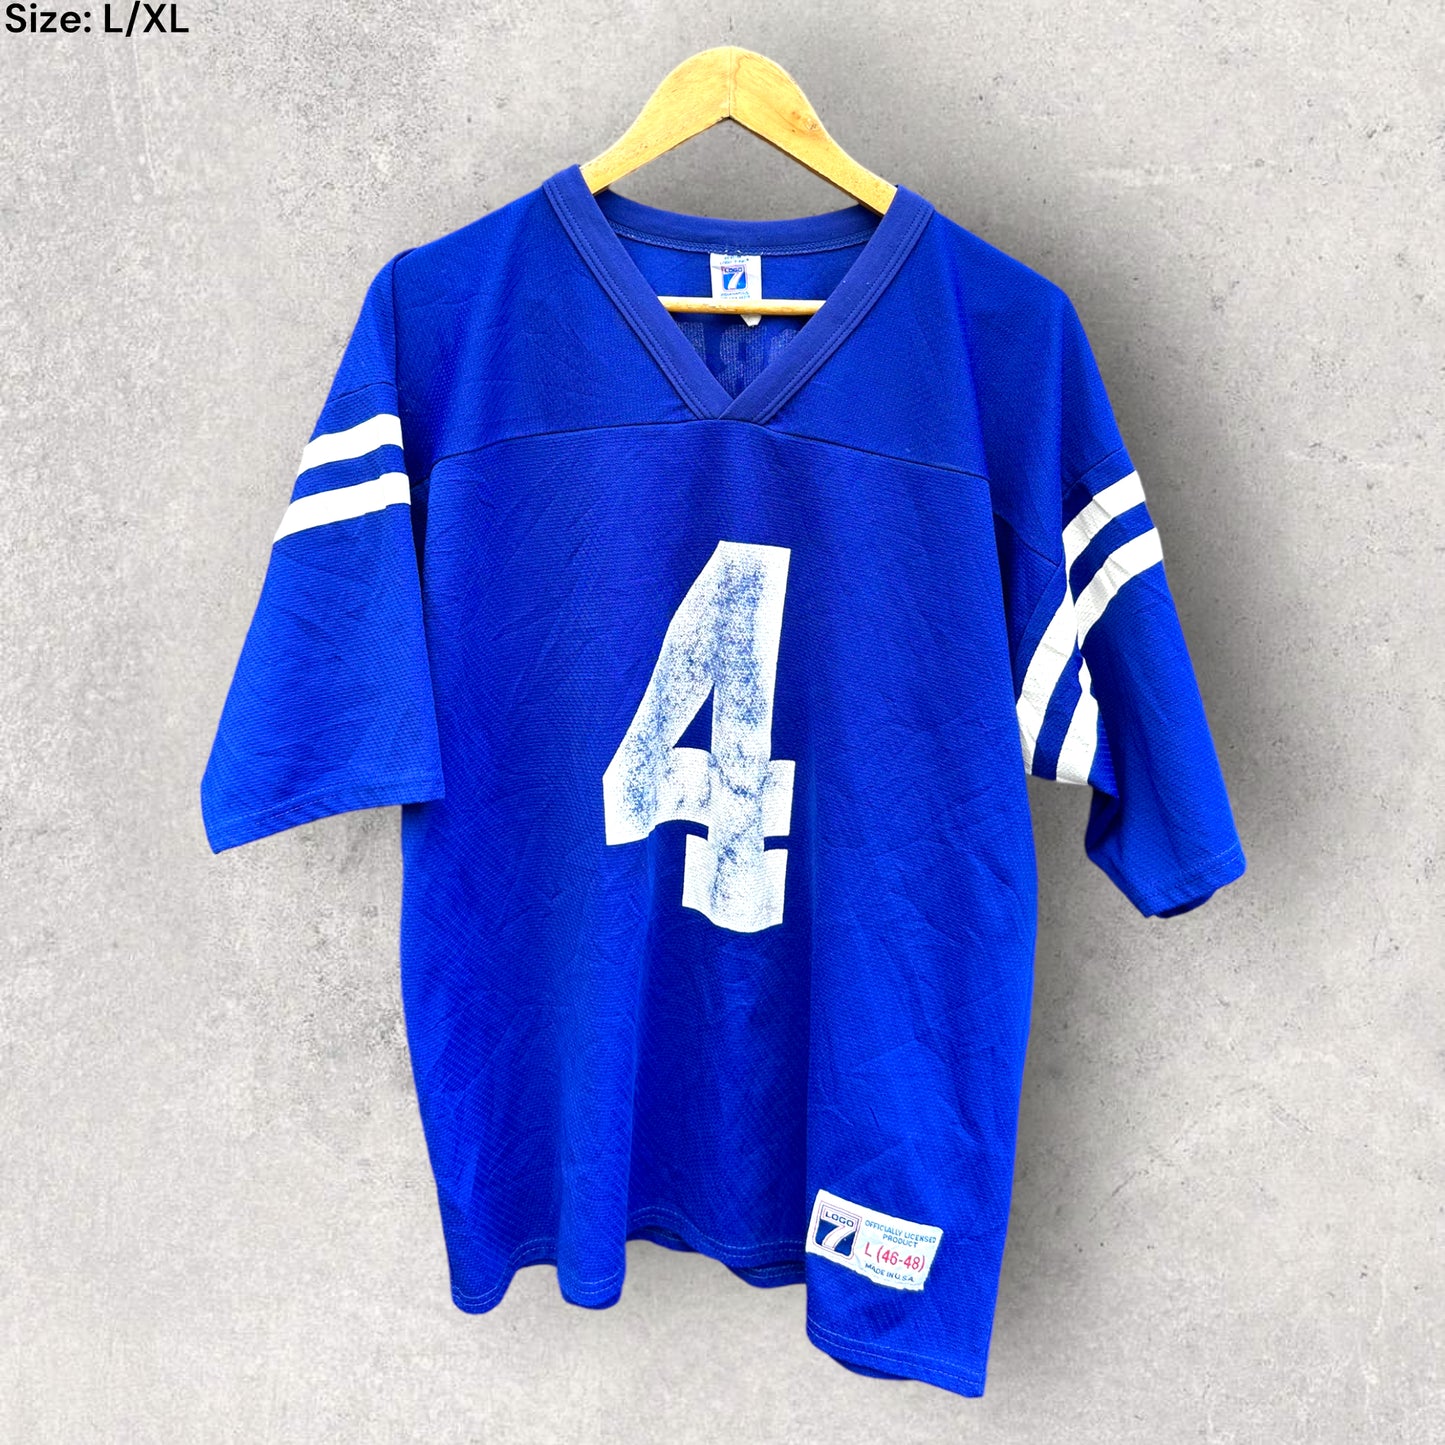 JIM HARBAUGH INDIANAPOLIS COLTS LOGO 7 EARLY 1990s JERSEY